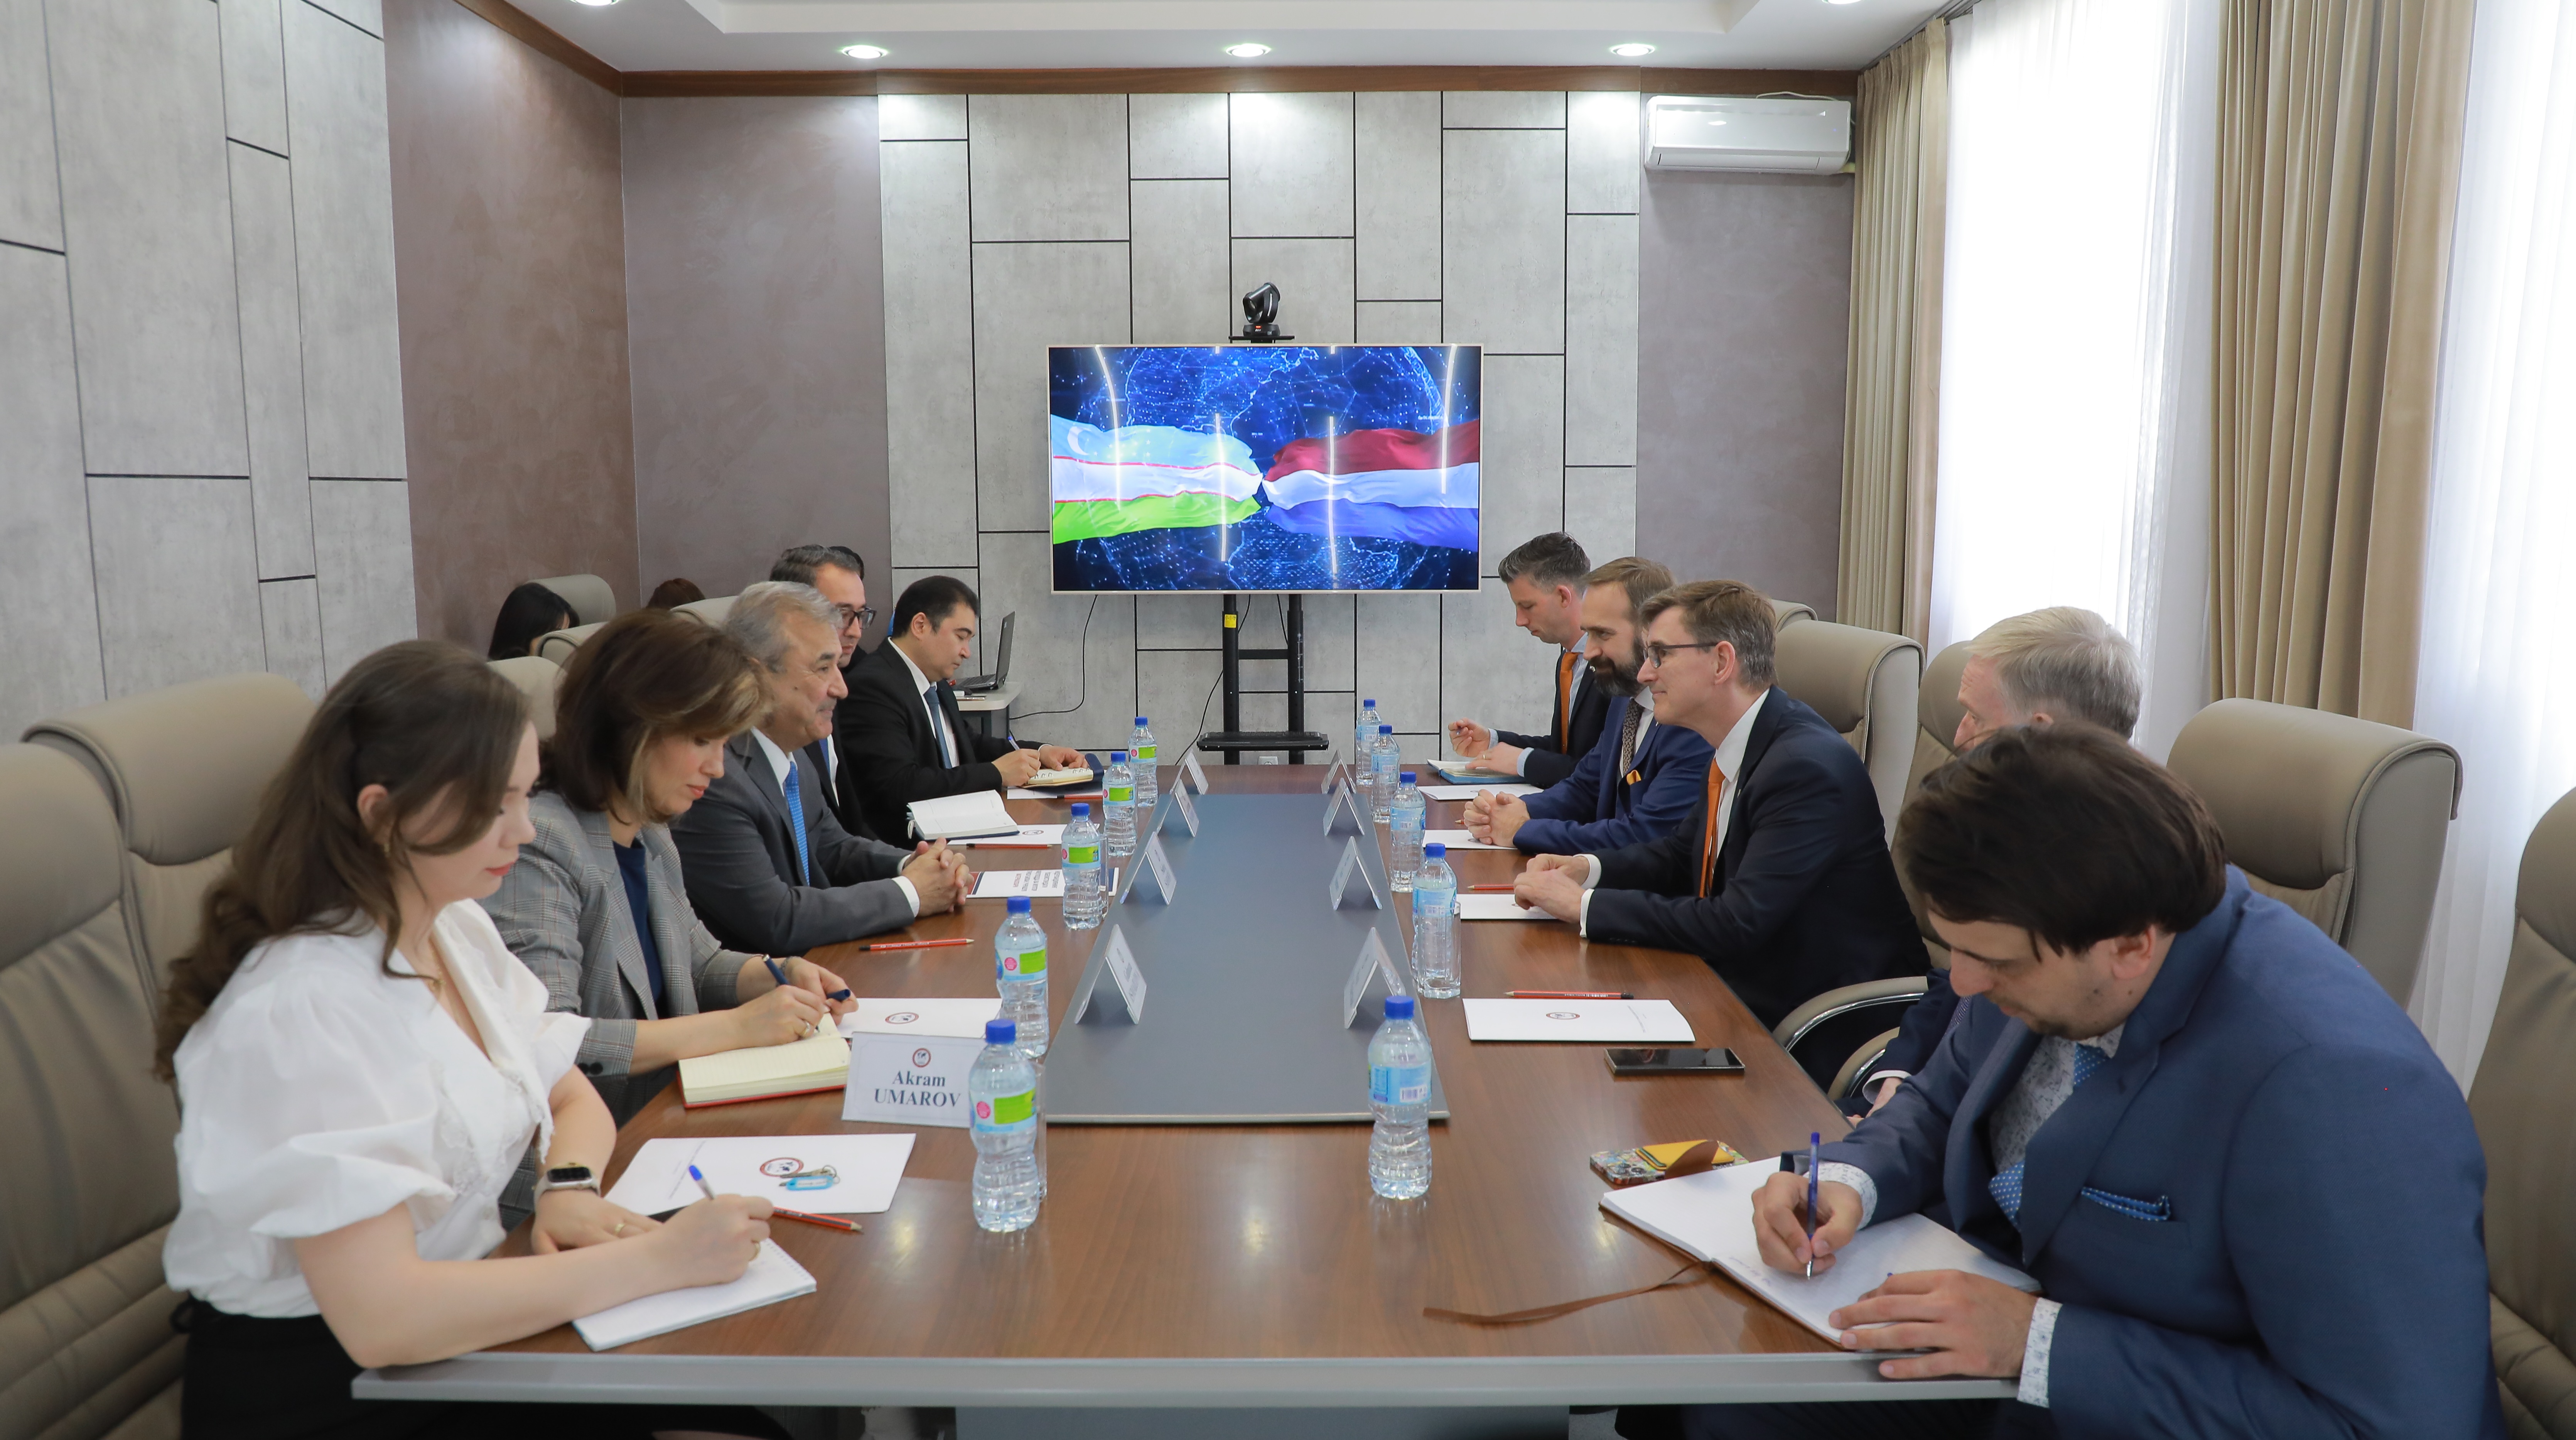 A meeting with the delegation of the Kingdom of the Netherlands took place at the University of World Economy and Diplomacy